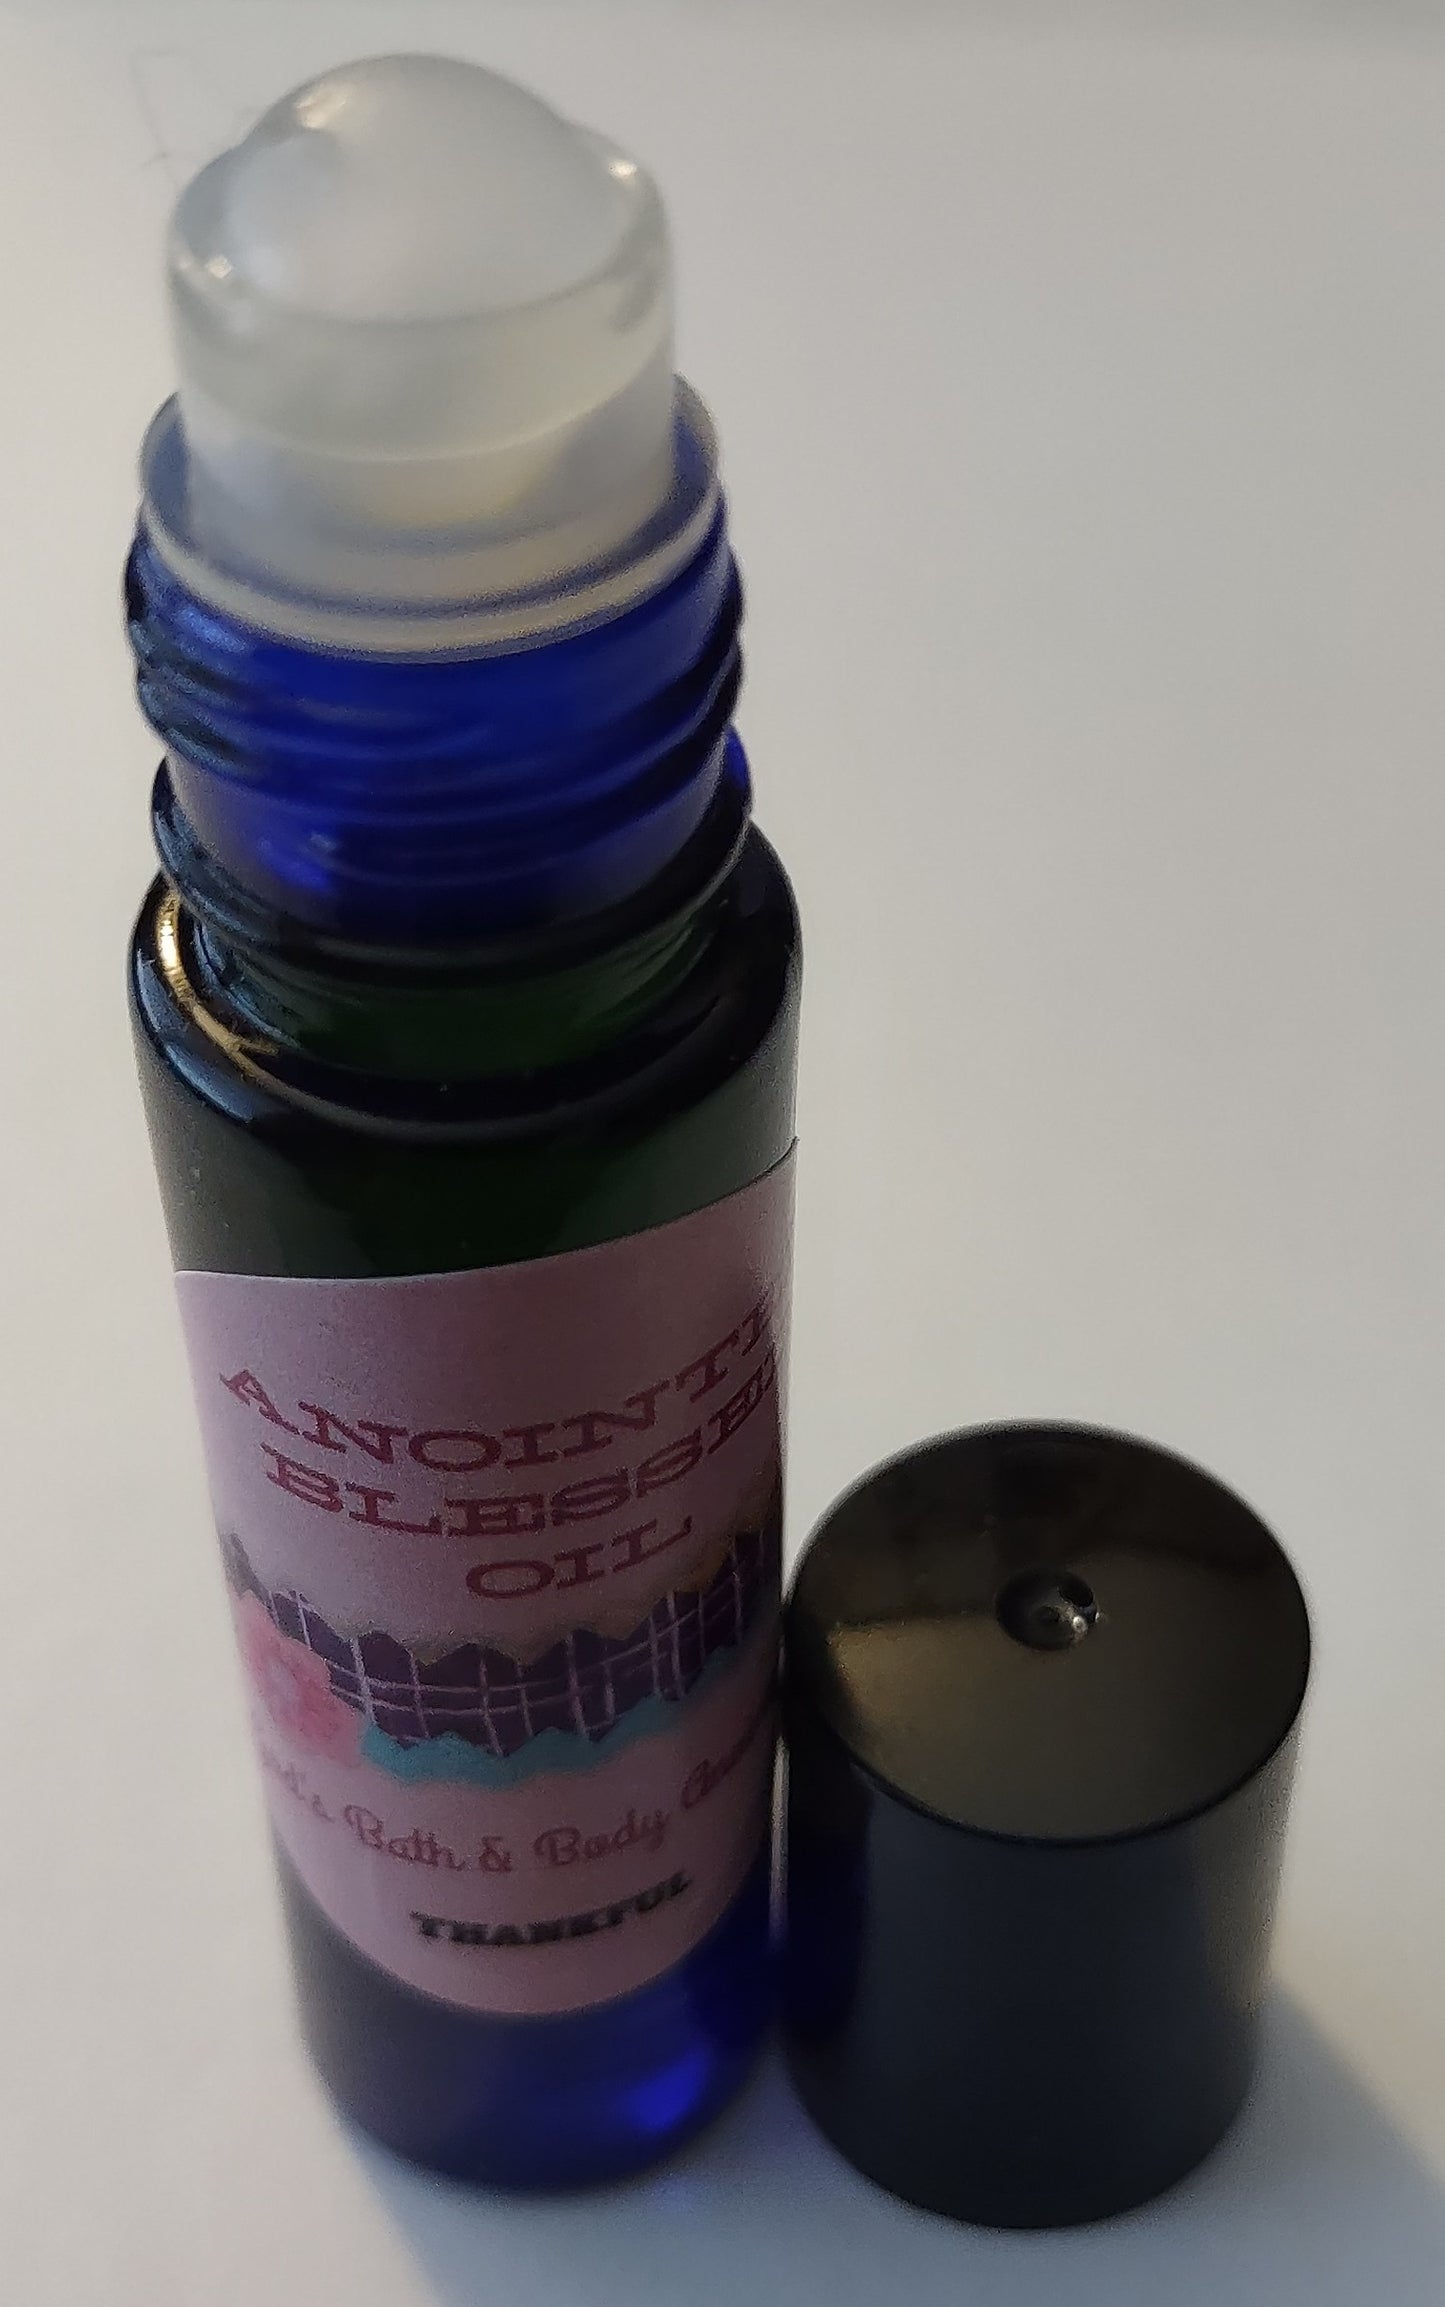 Thankful anointed blessed oil - 1/3oz roll-on bottle